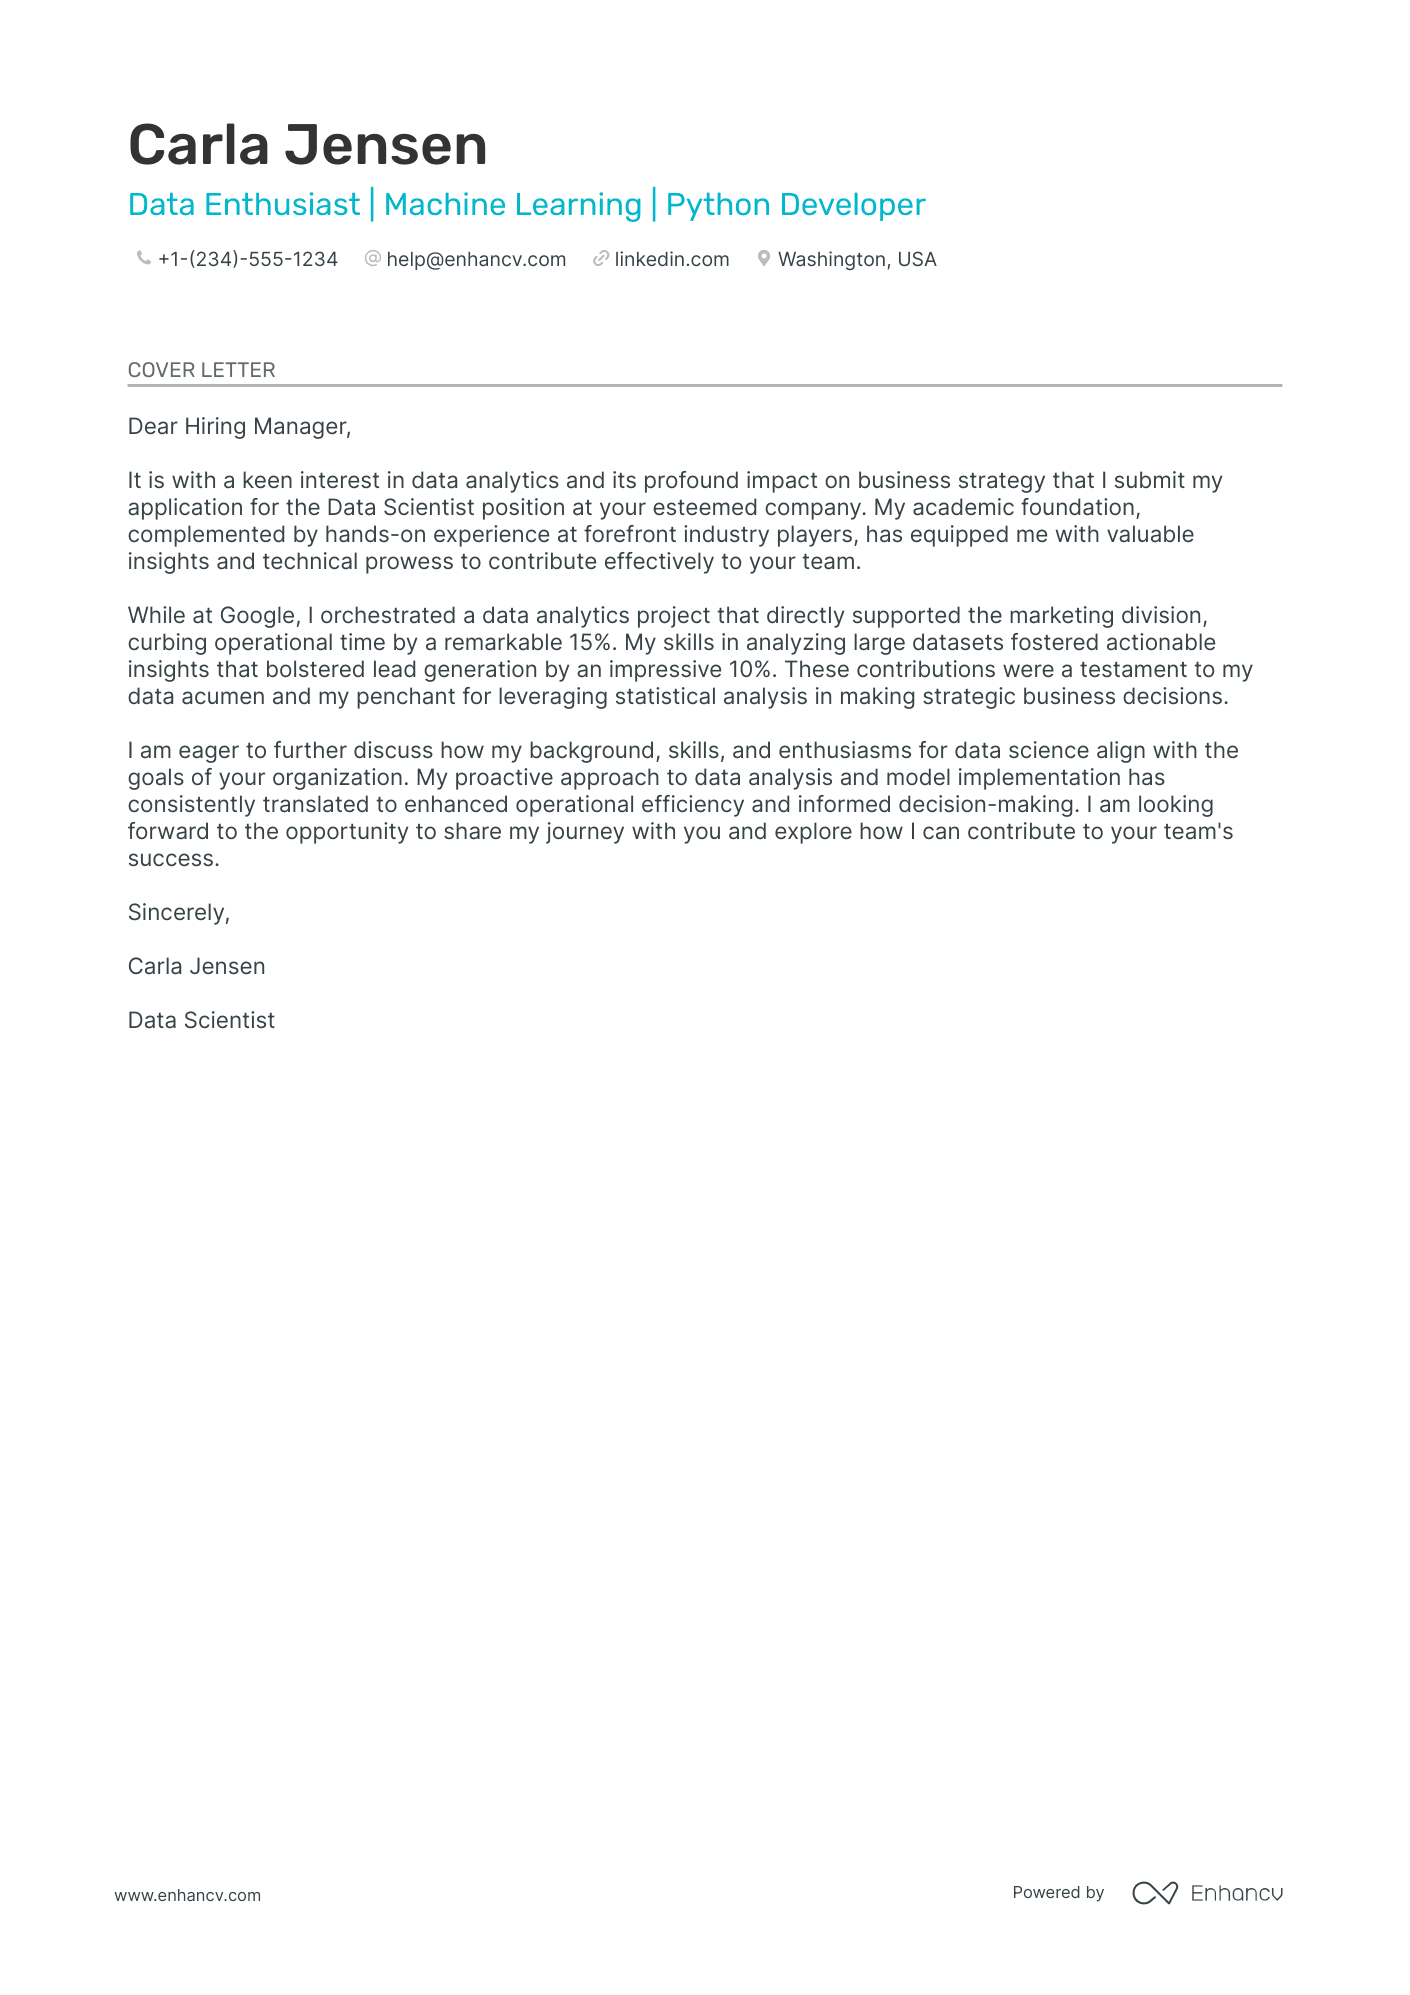 data scientist cover letter template